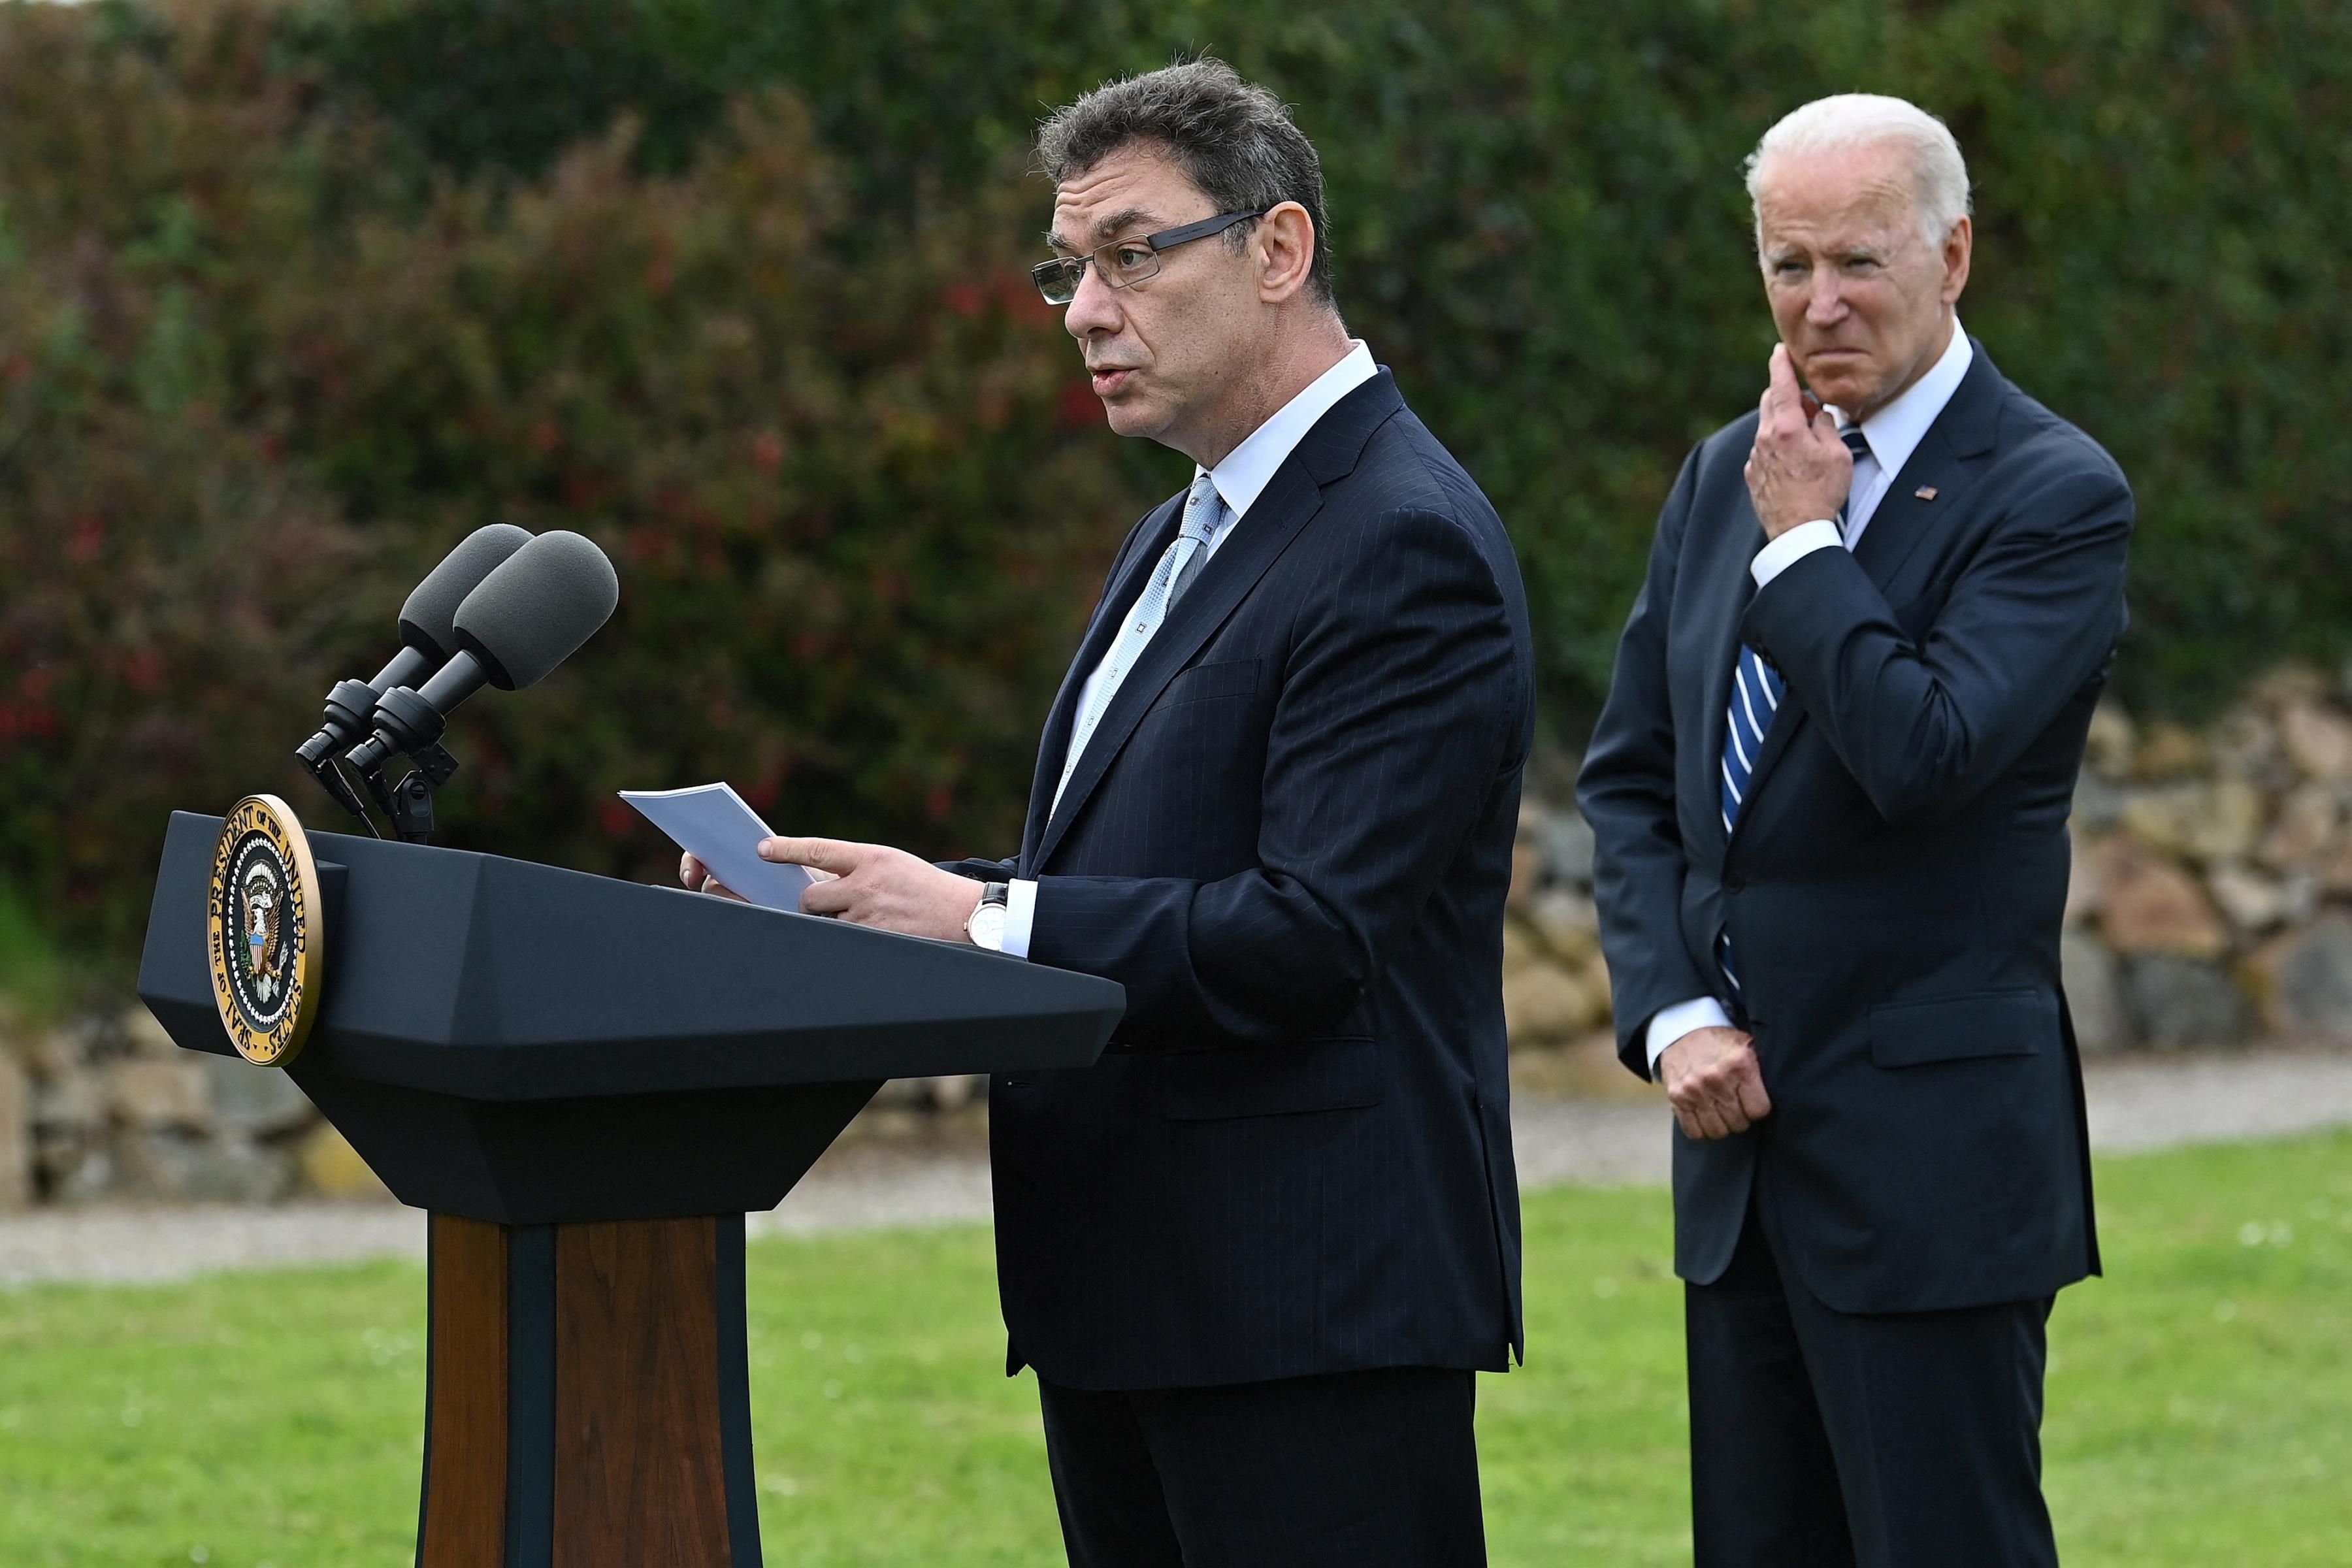 Pfizer CEO Albert Bourla speaks during a press conference